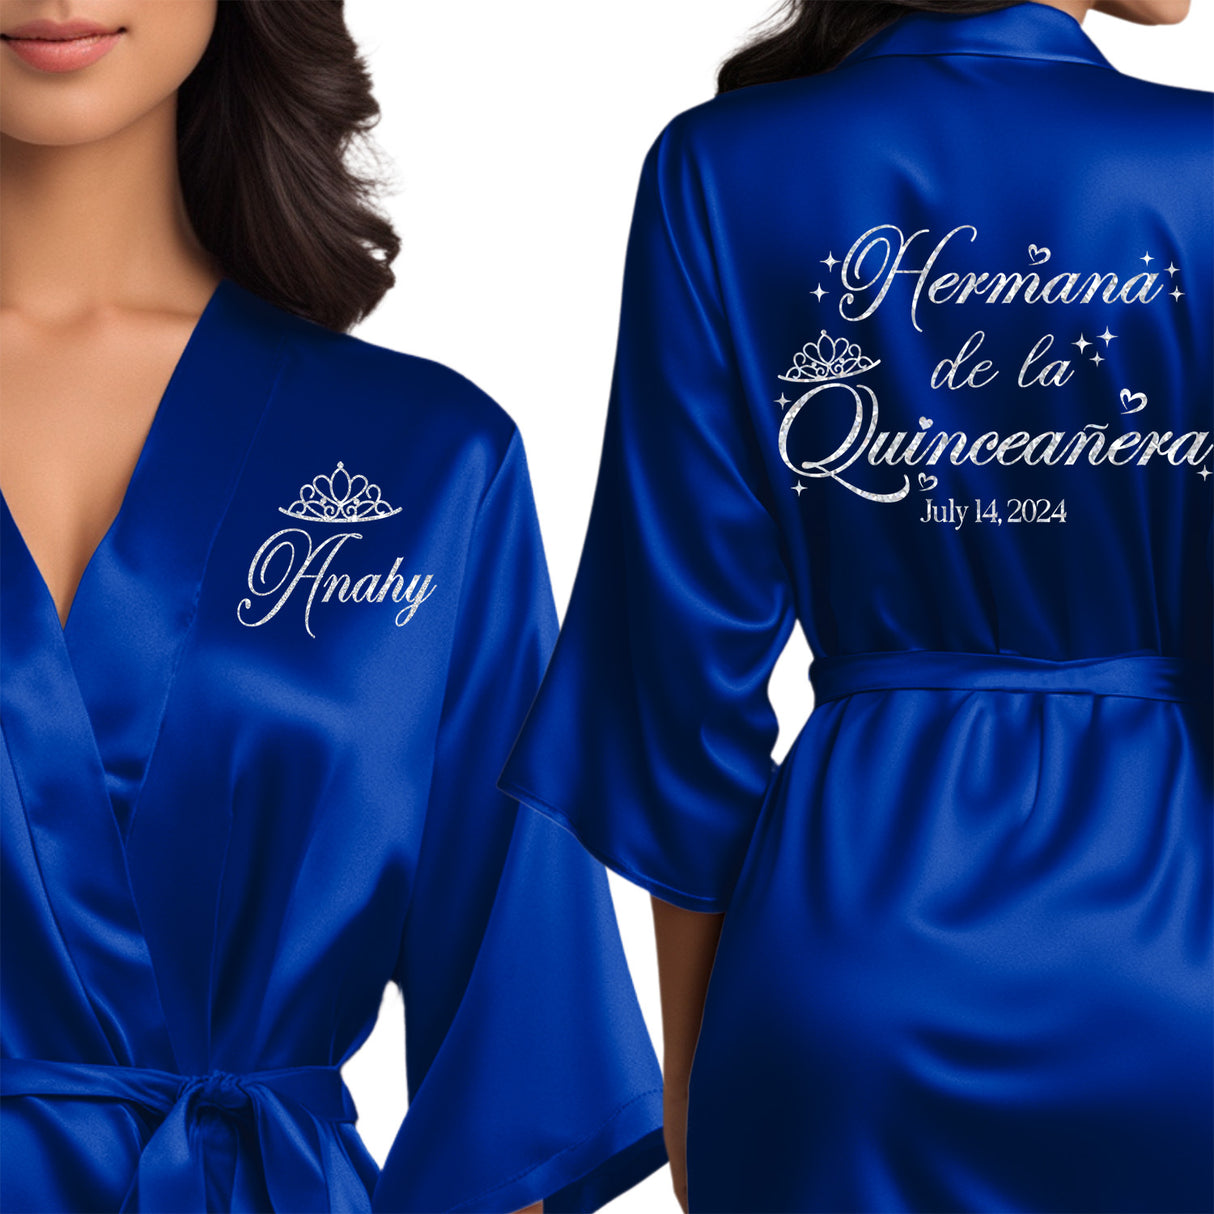 Personalized royal blue quinceanera robes with  silver glitter. Hermana de la quinceanera getting ready robes.